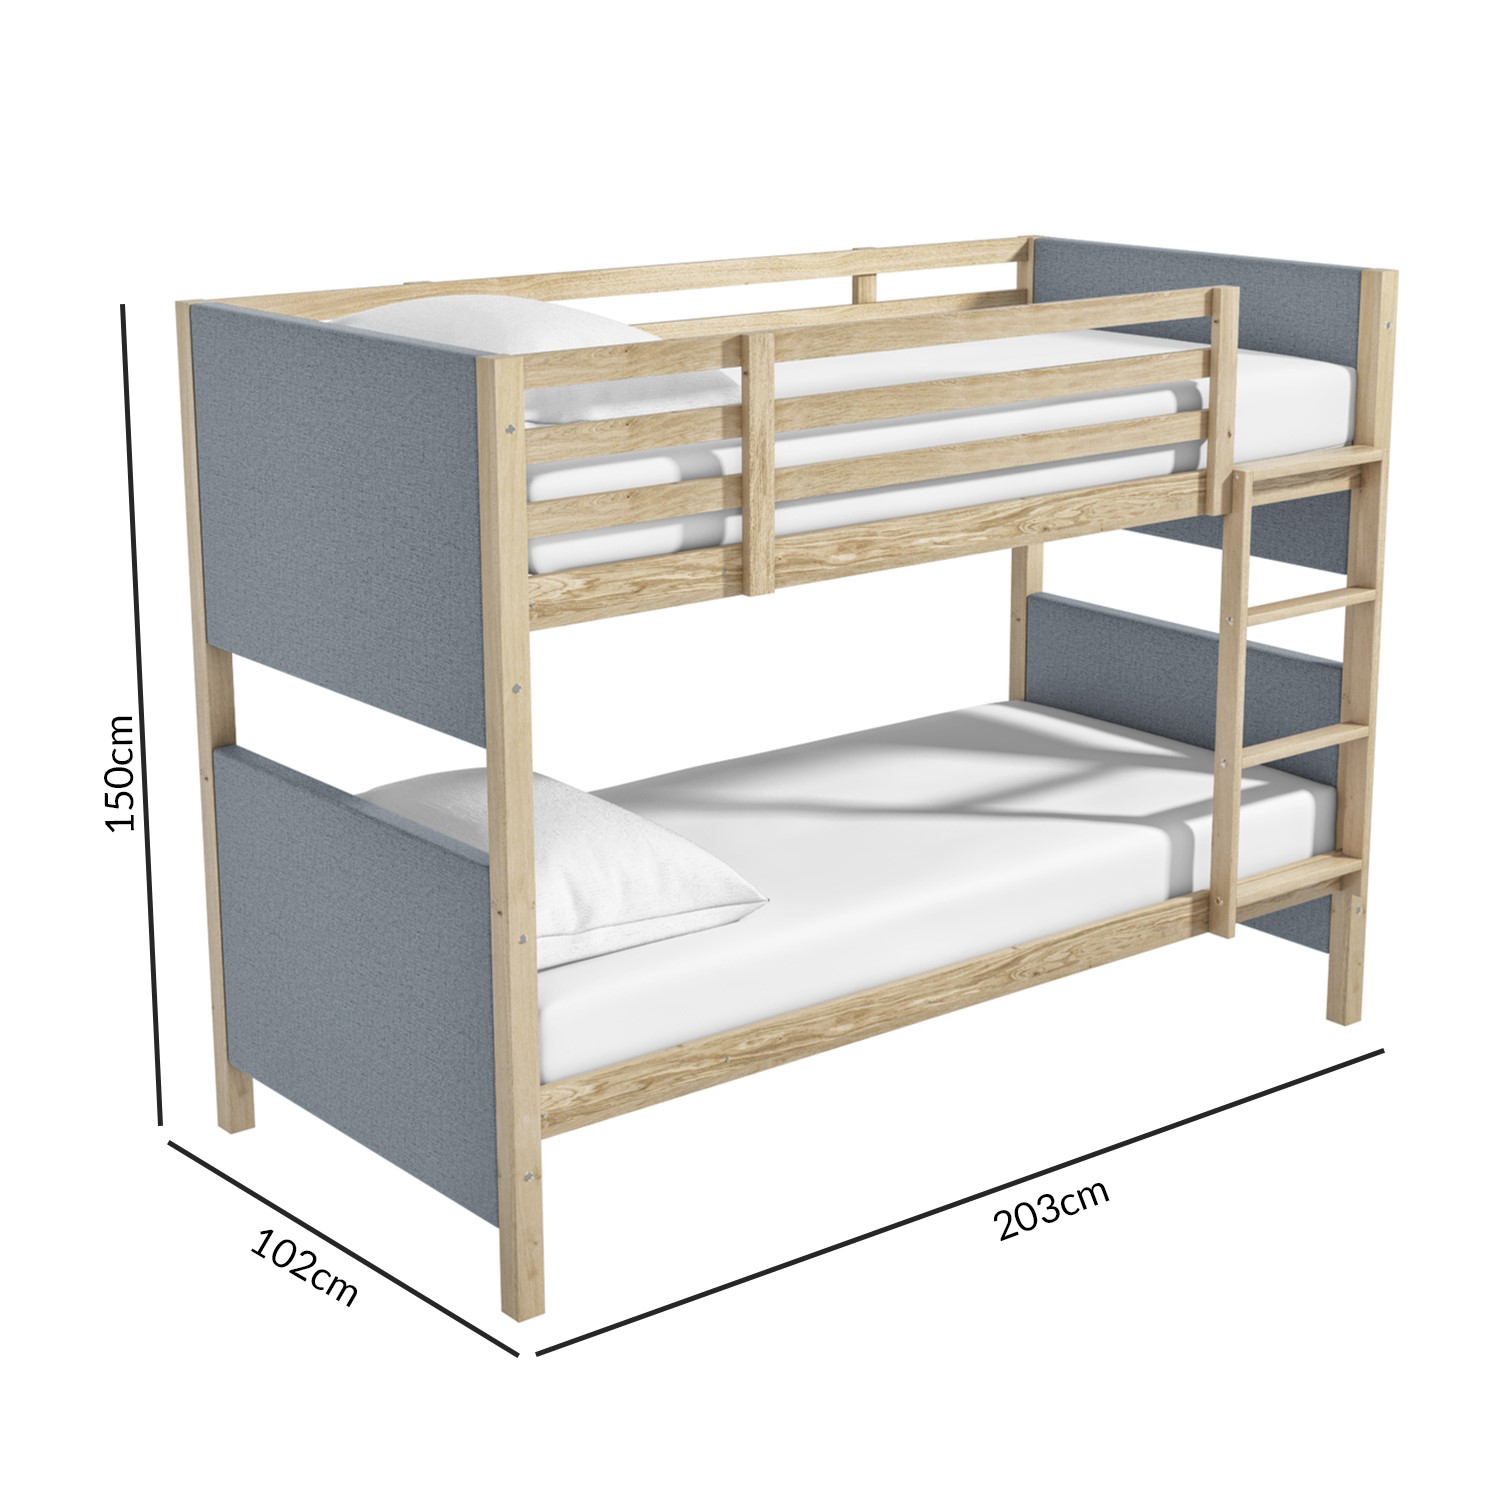 Morgan Upholstered Bunk Bed In Grey And, Mor Bunk Beds